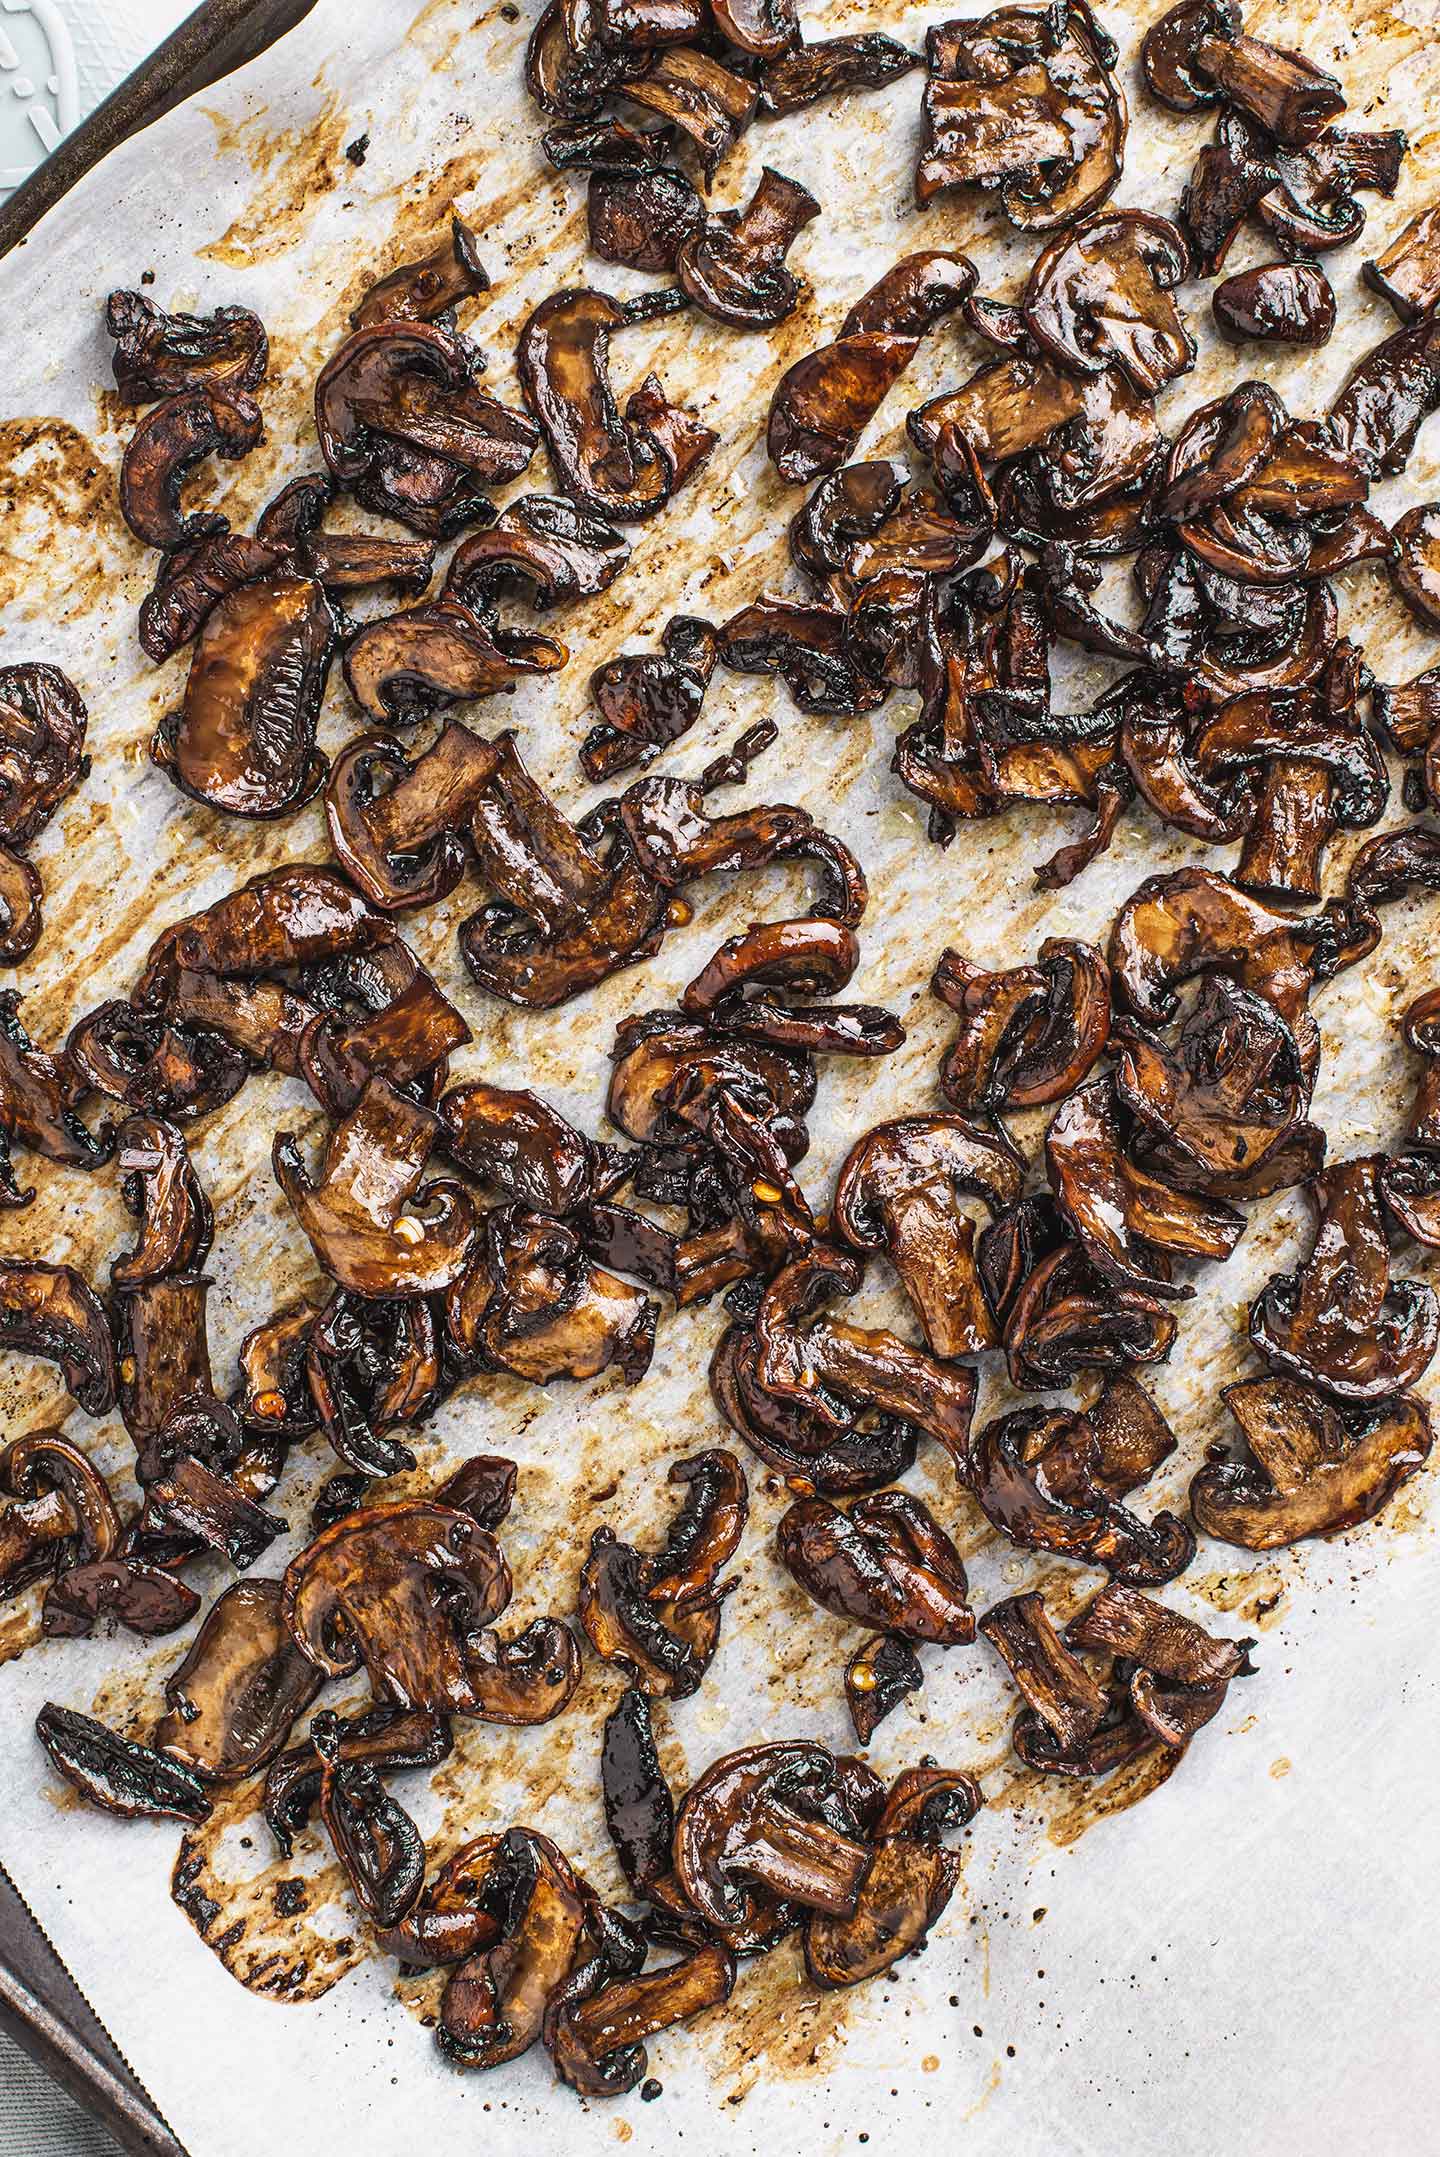 Top down view of cooked smoky spicy mushrooms on a baking sheet lined with parchment paper.